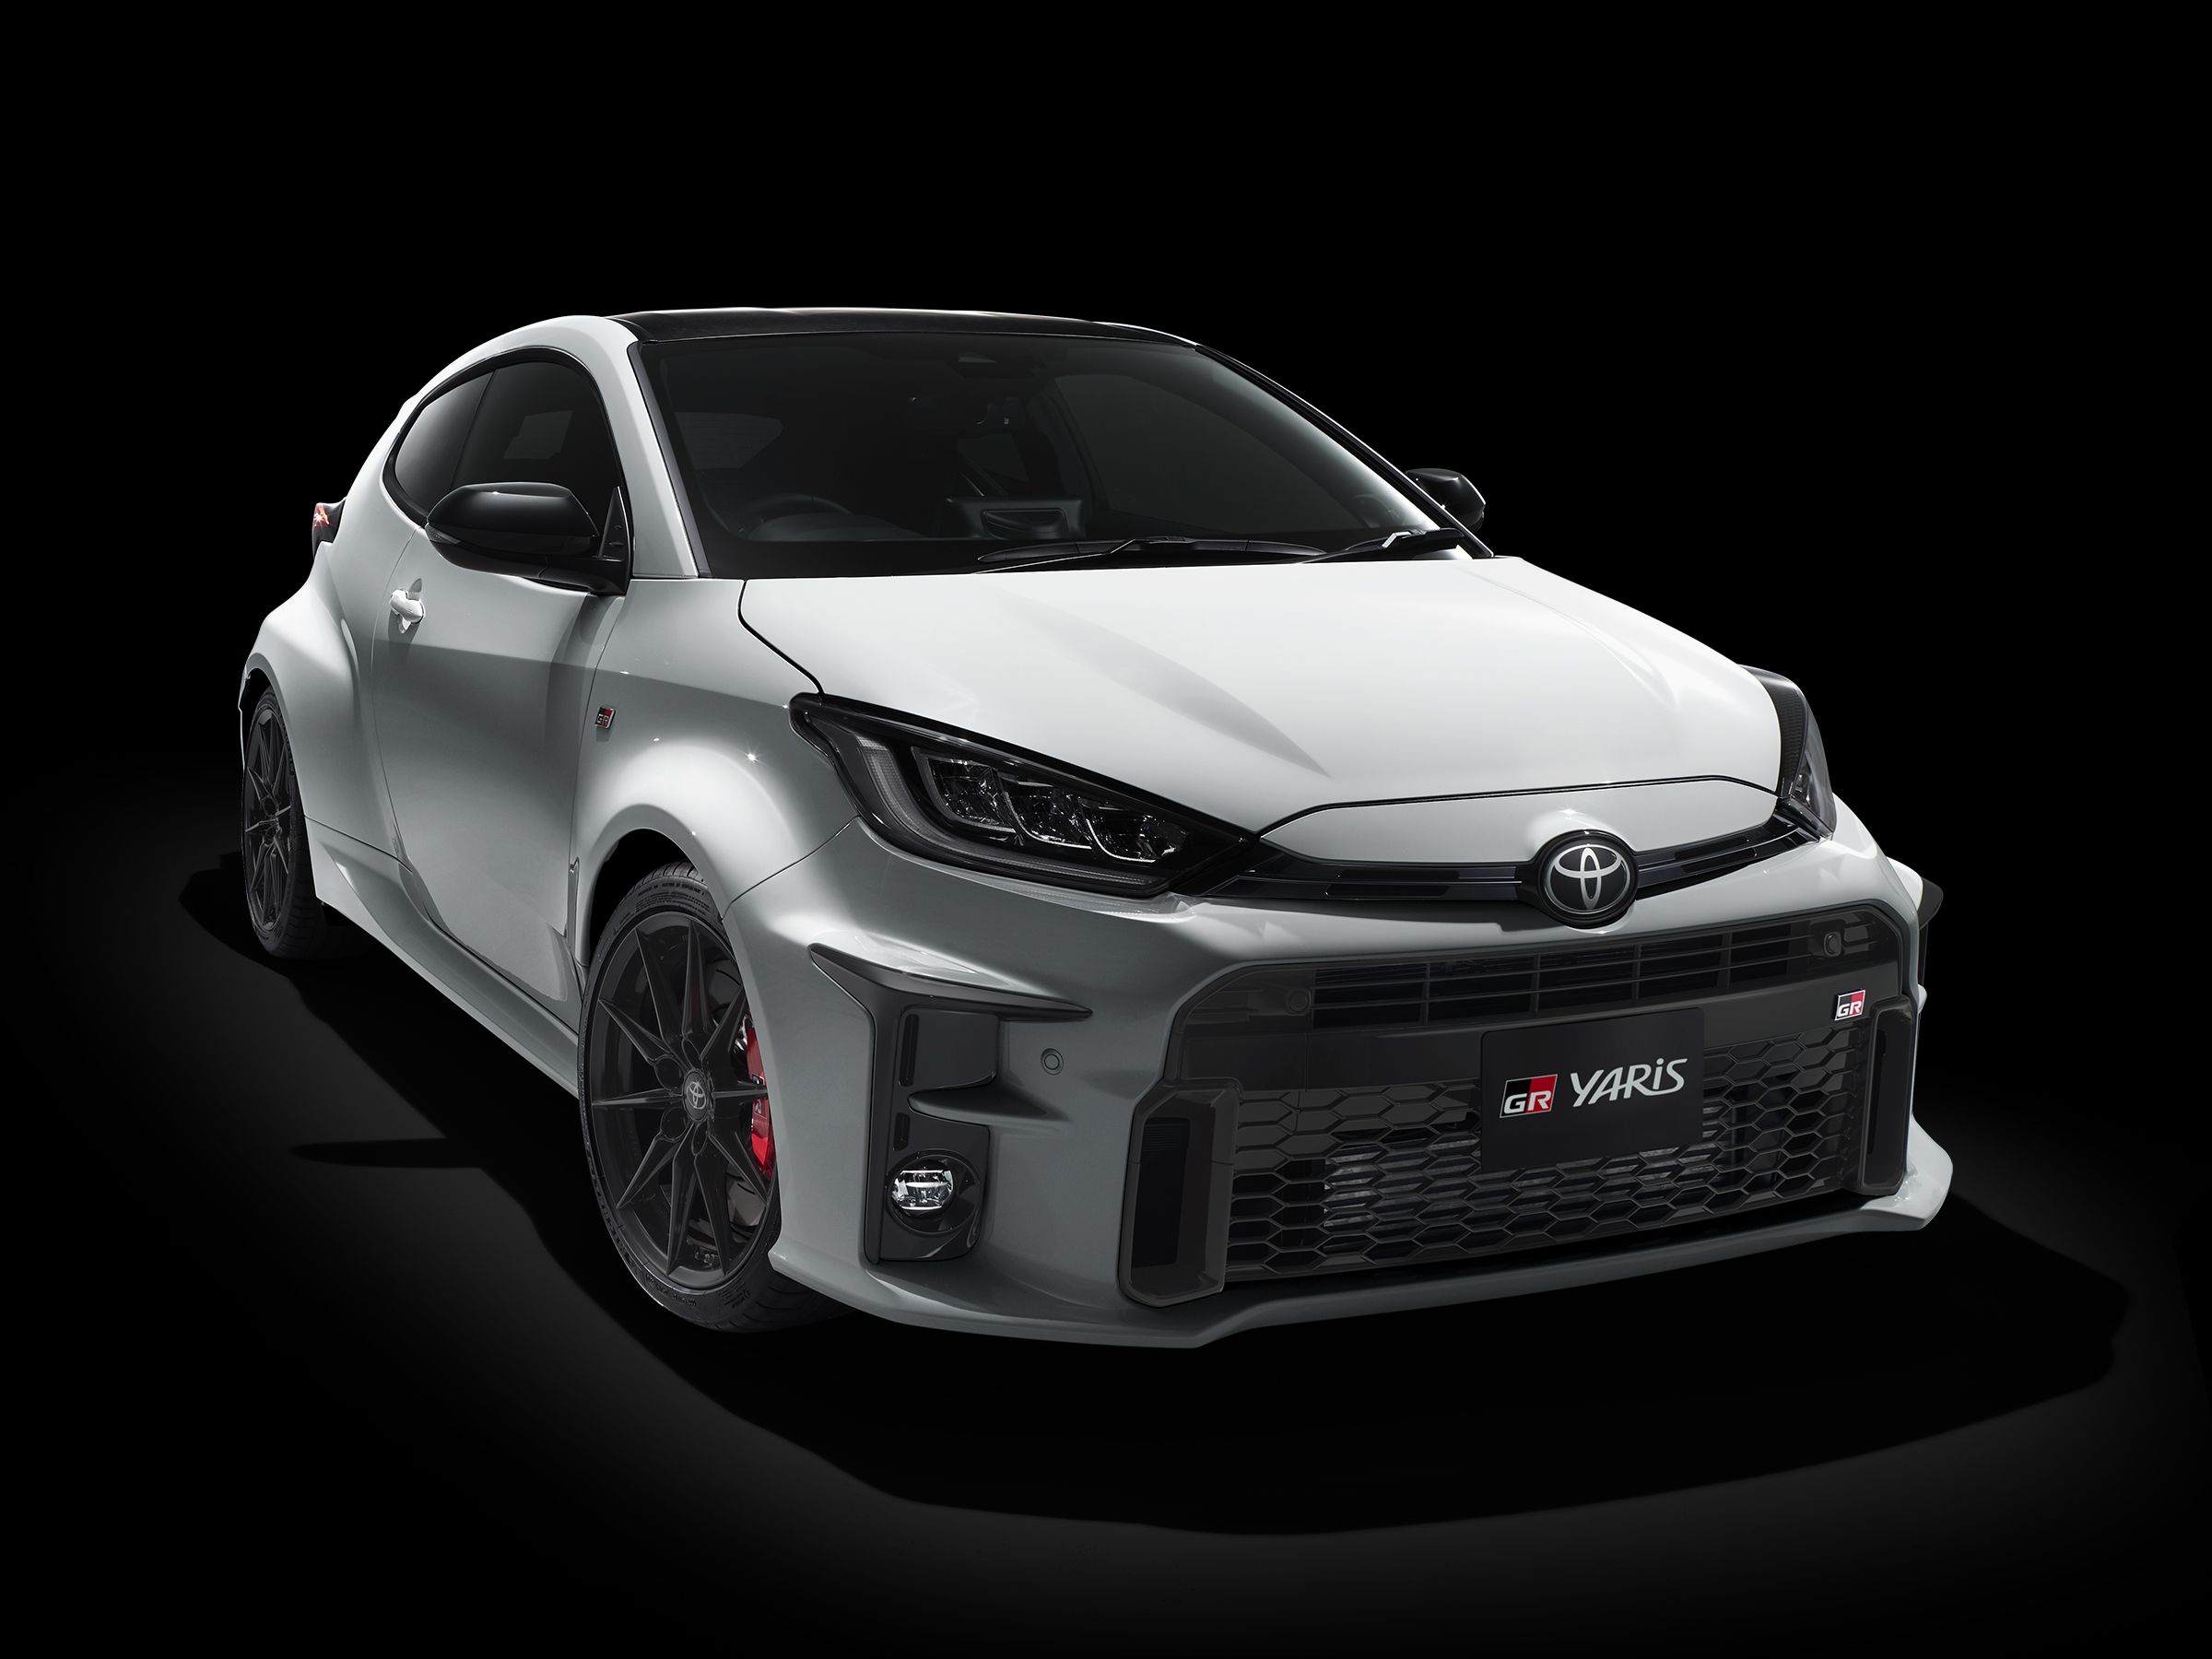 2021 Toyota GR Yaris Hot Hatch Revealed - New 257-HP AWD at Tokyo